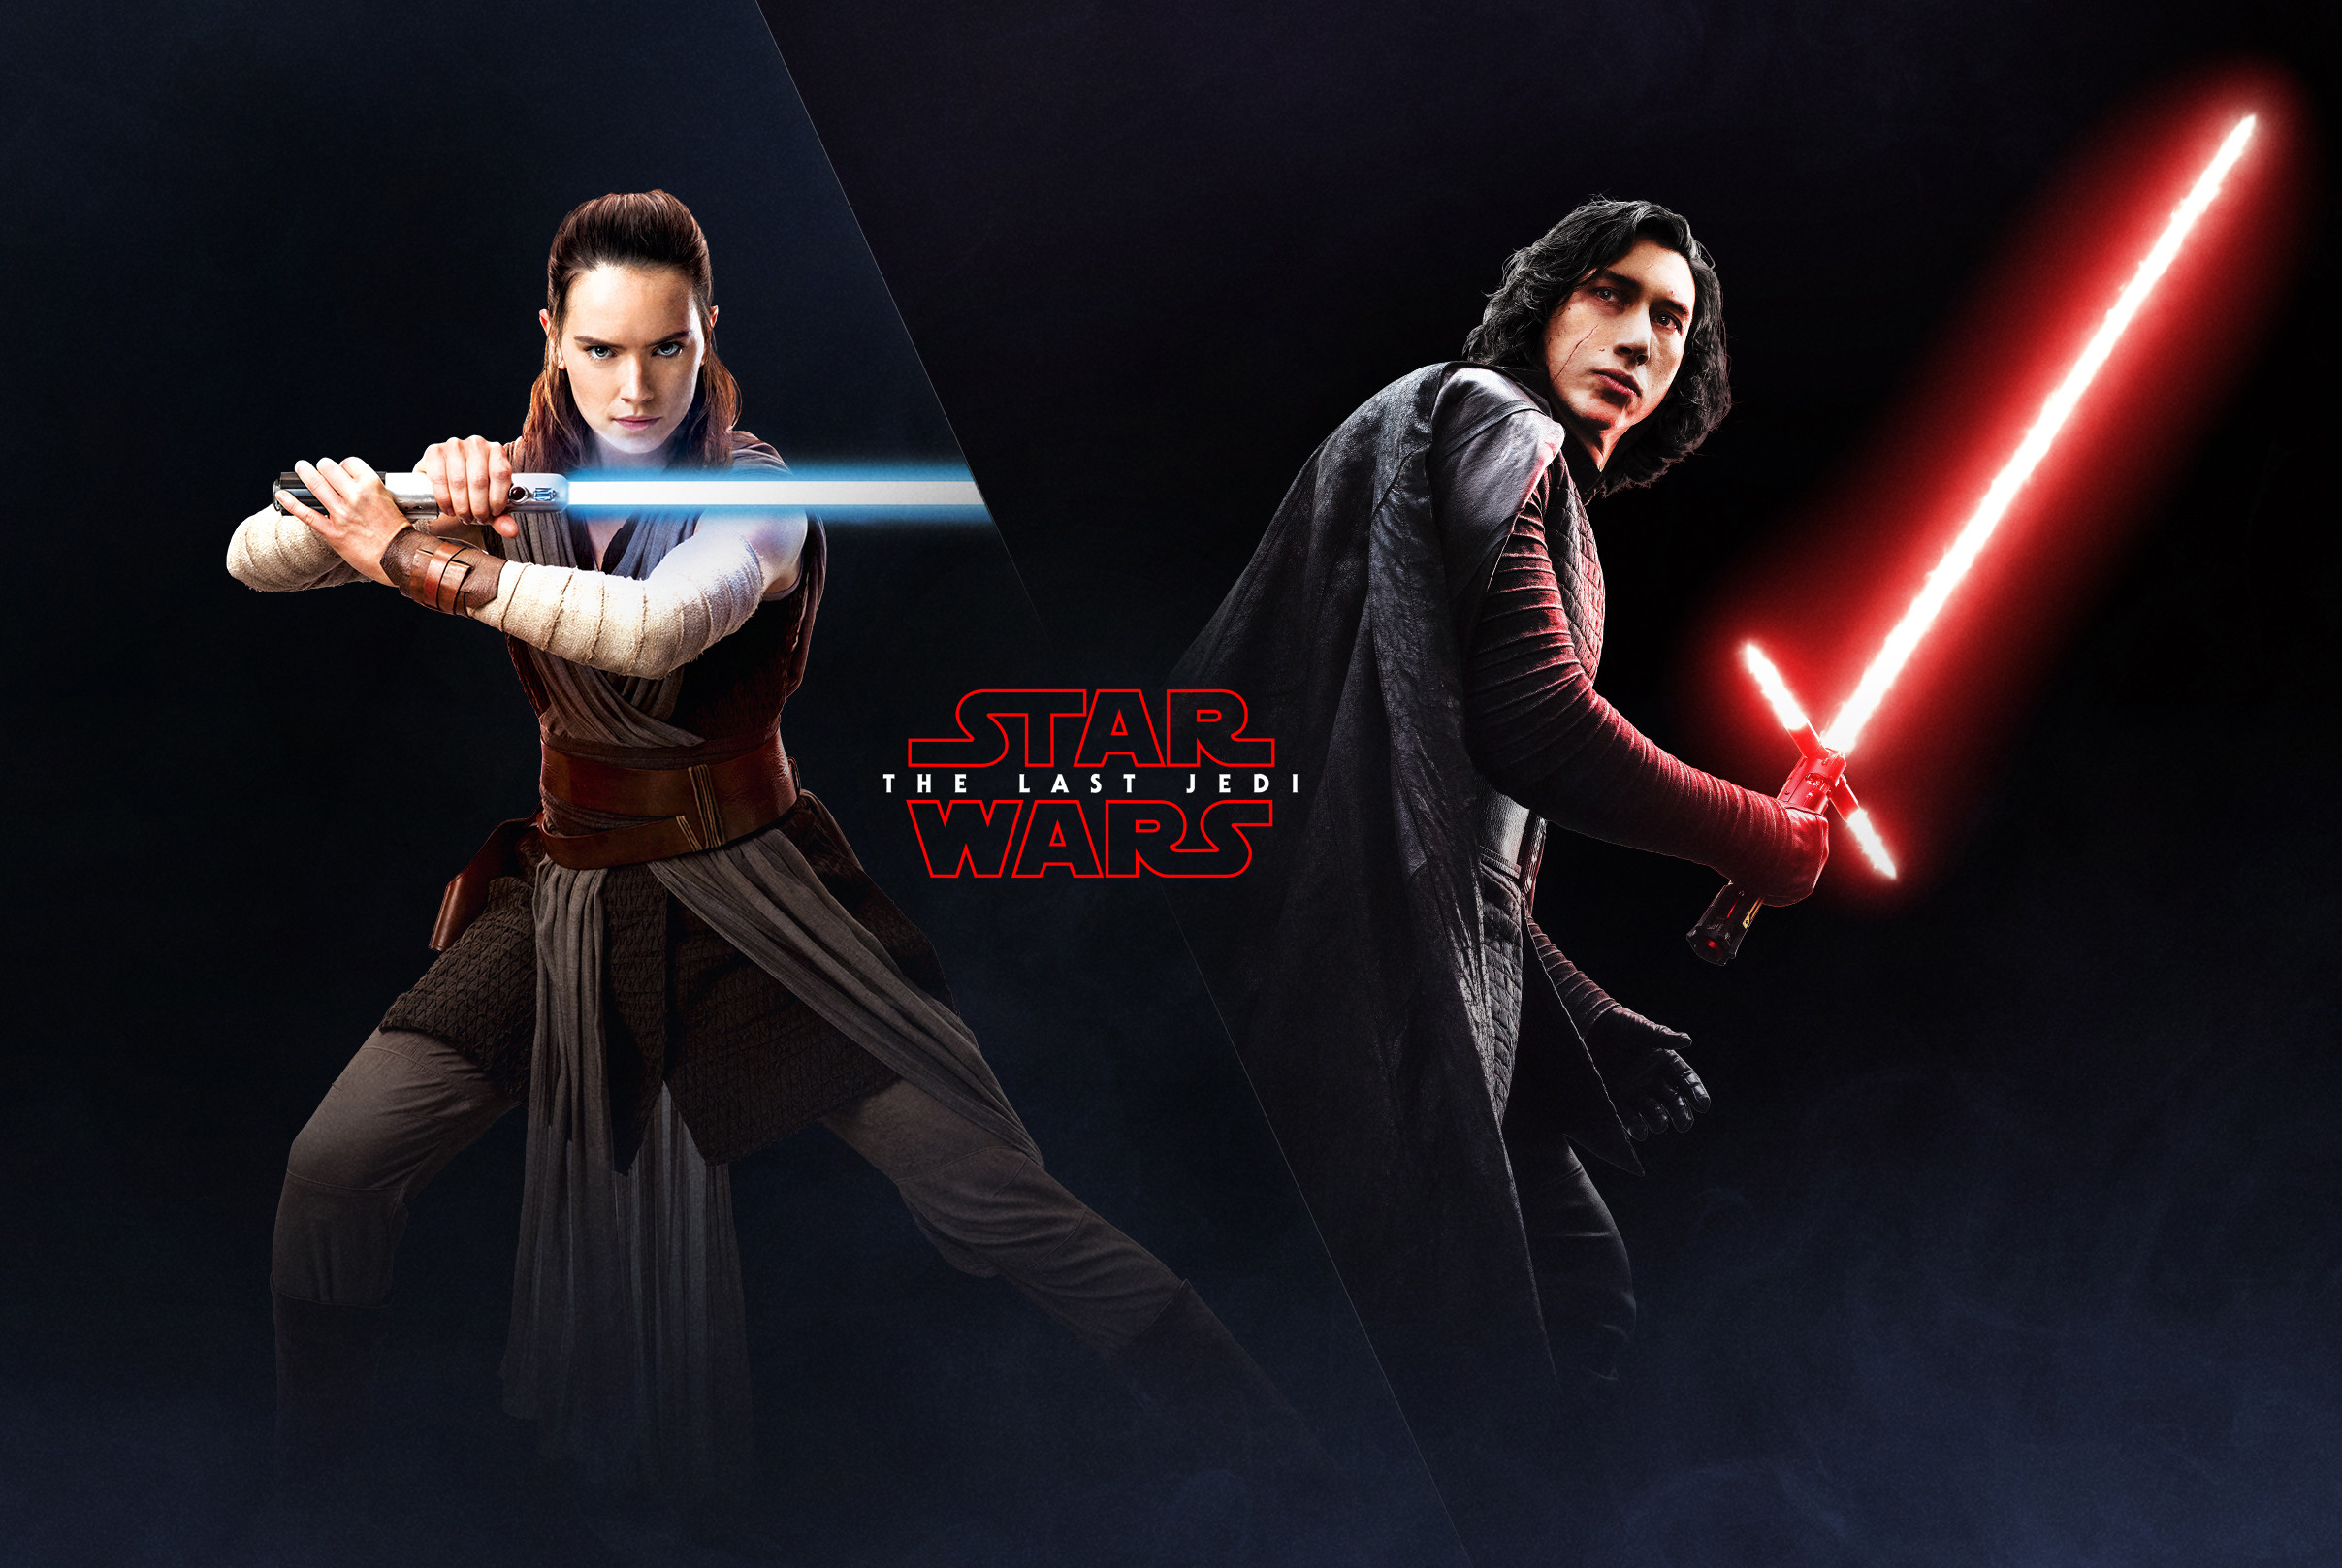 The Last Jedi Wallpaper Rey and Kylo Ren EA Battlefront 2 Poster 2 HD